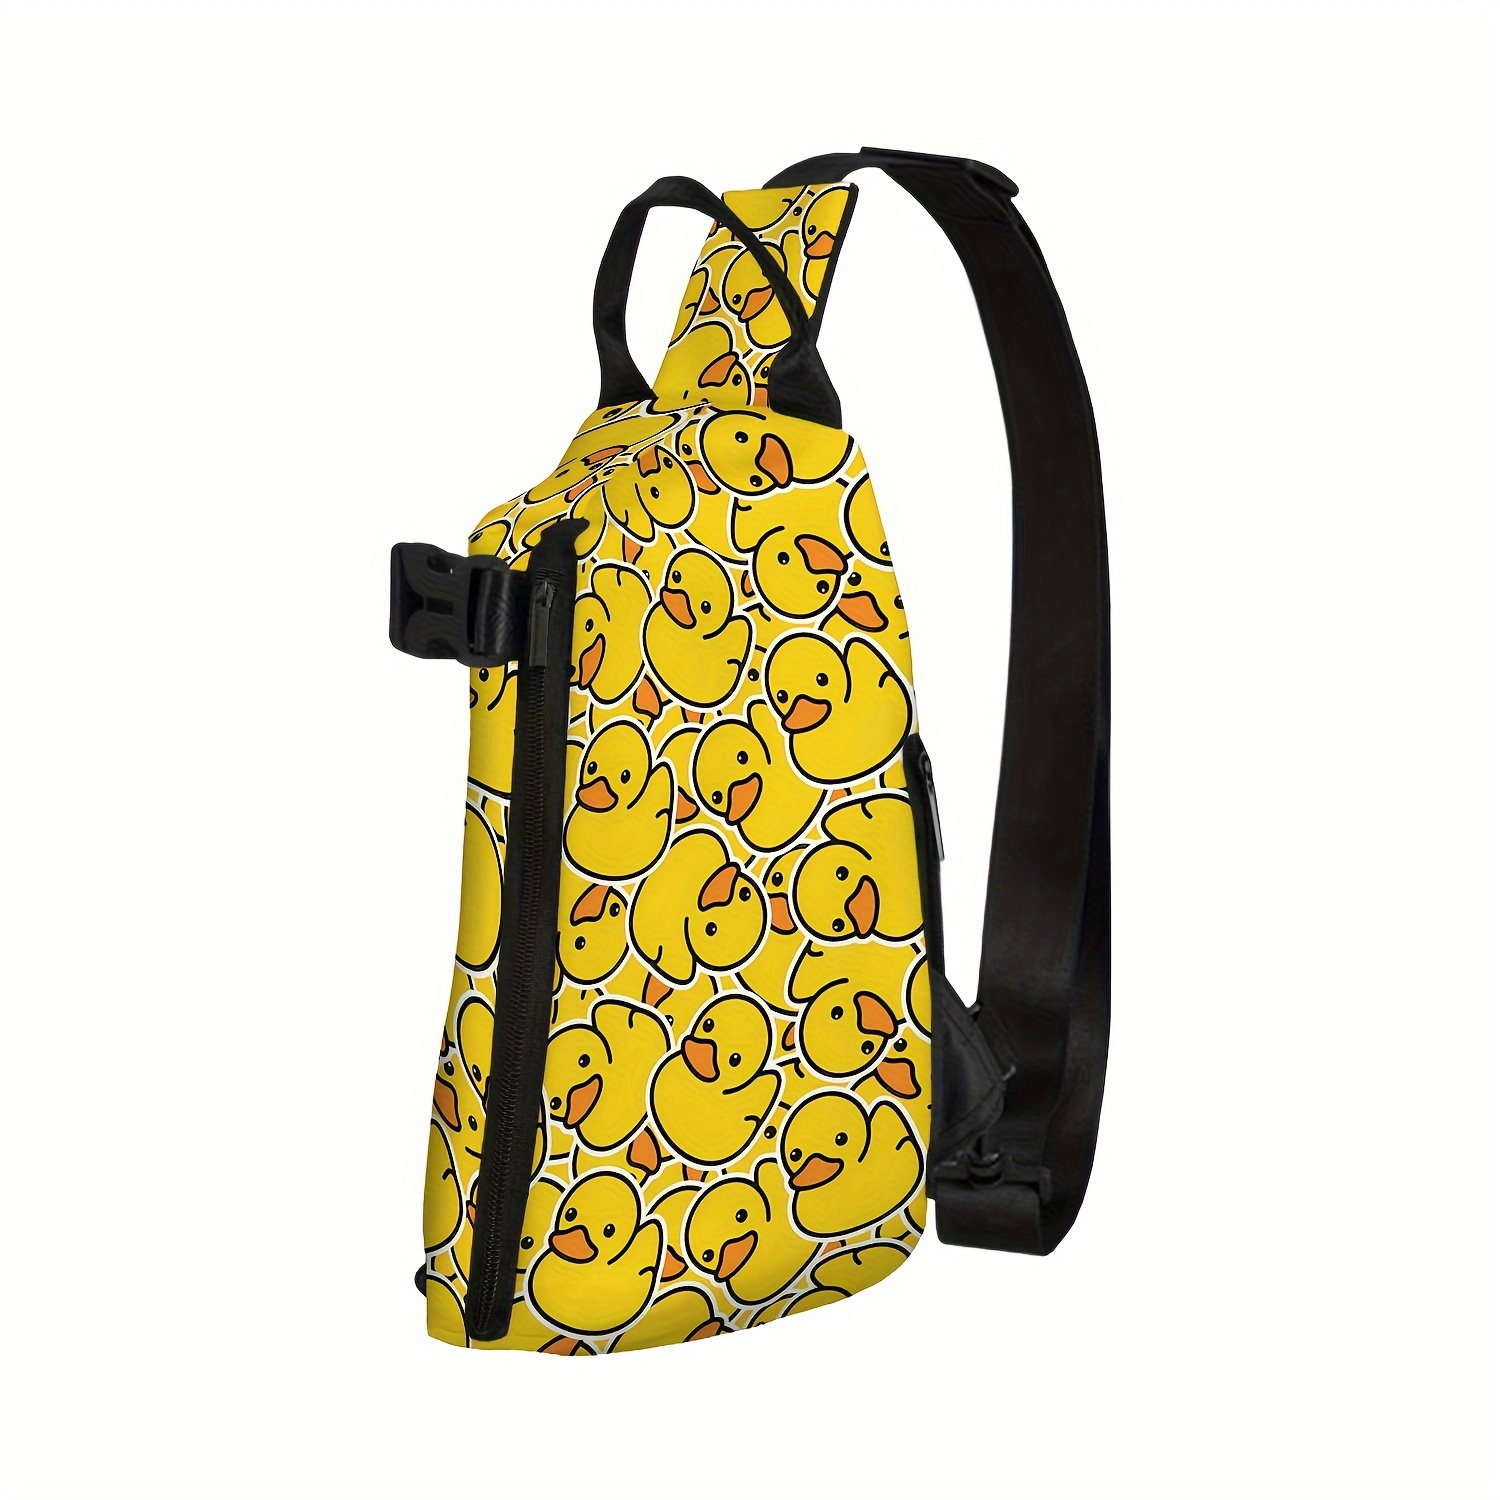 Rubber Duck Print Backpack